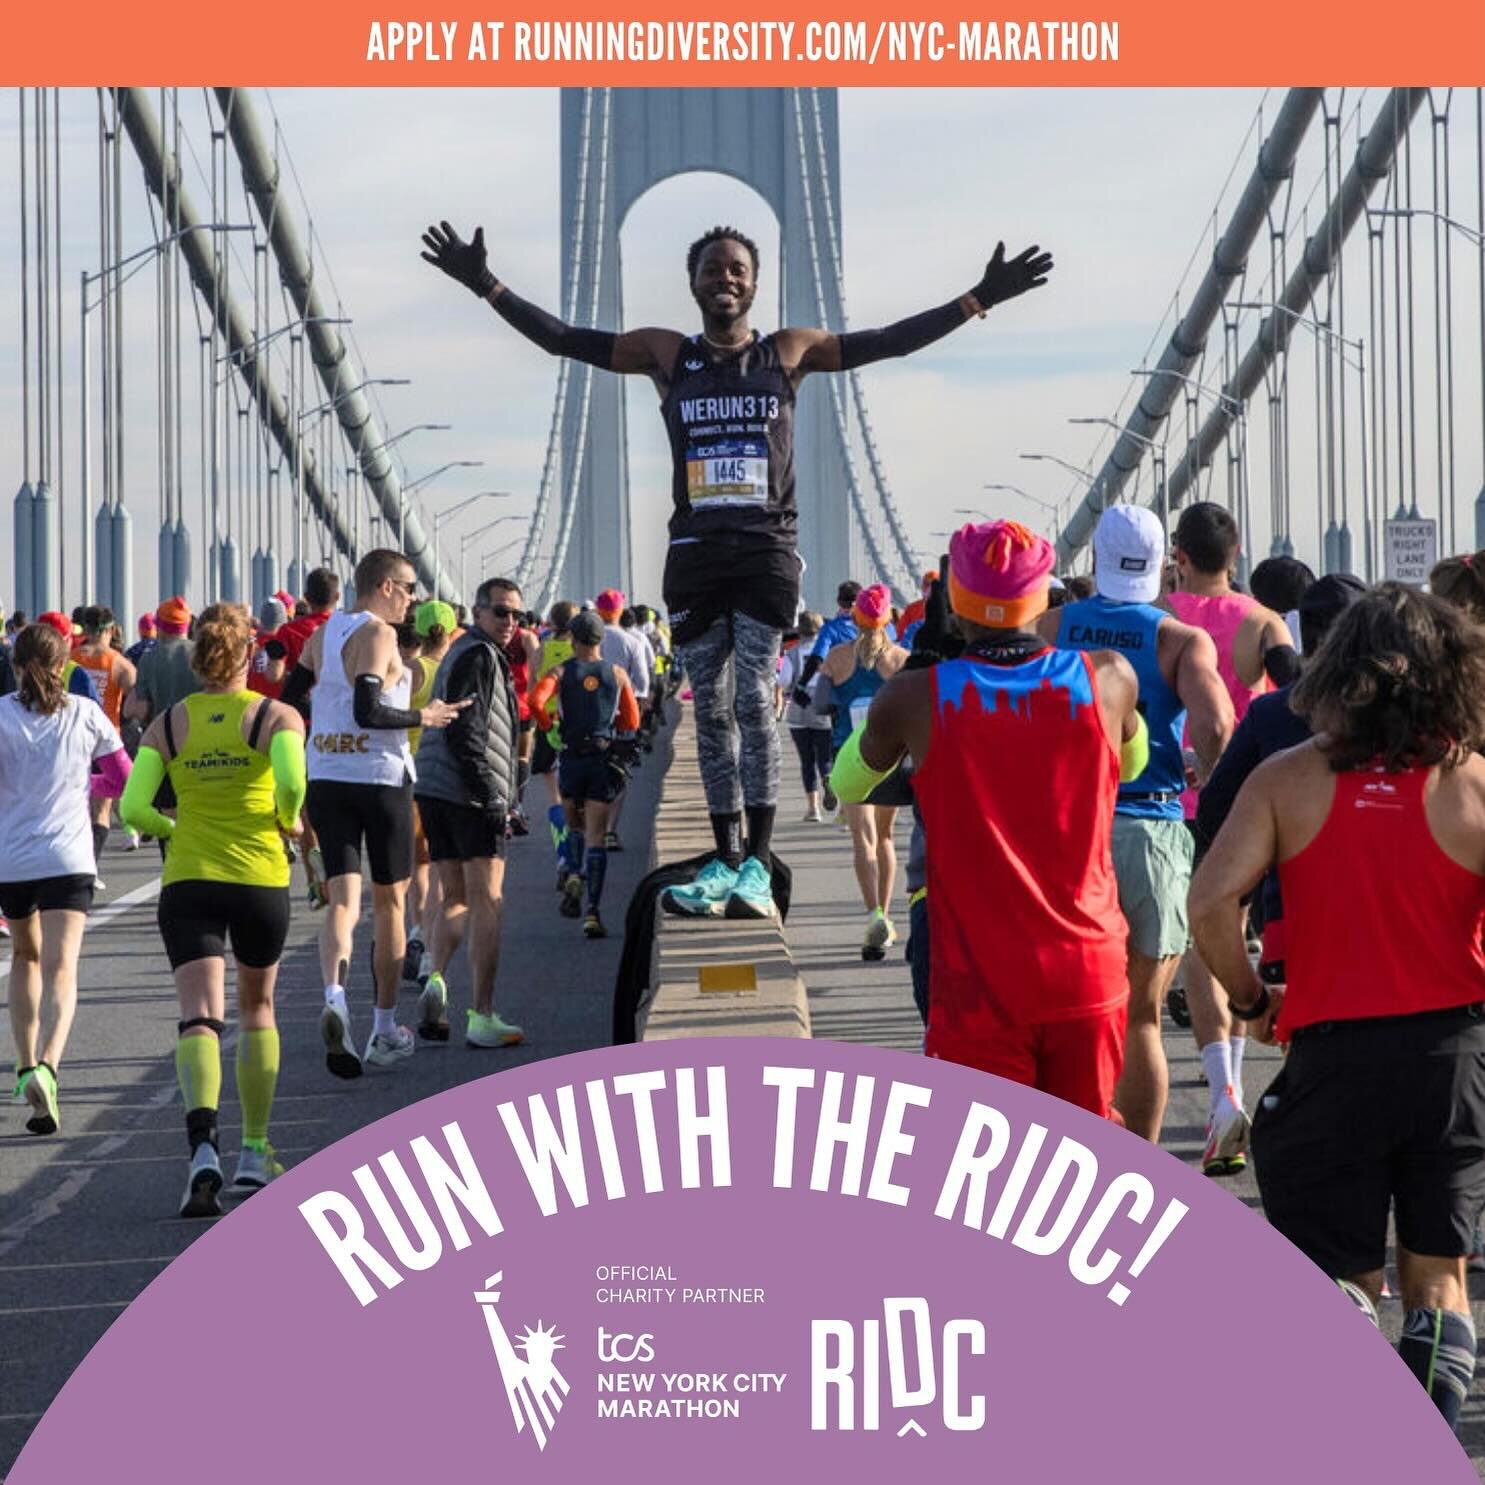 Surprise! We are proud to share that the RIDC is an official charity partner for the 2024 TCS New York City Marathon!

As a charity partner, we have five fundraising spots on our official RIDC Team! Want to run? We are looking for team members who ar